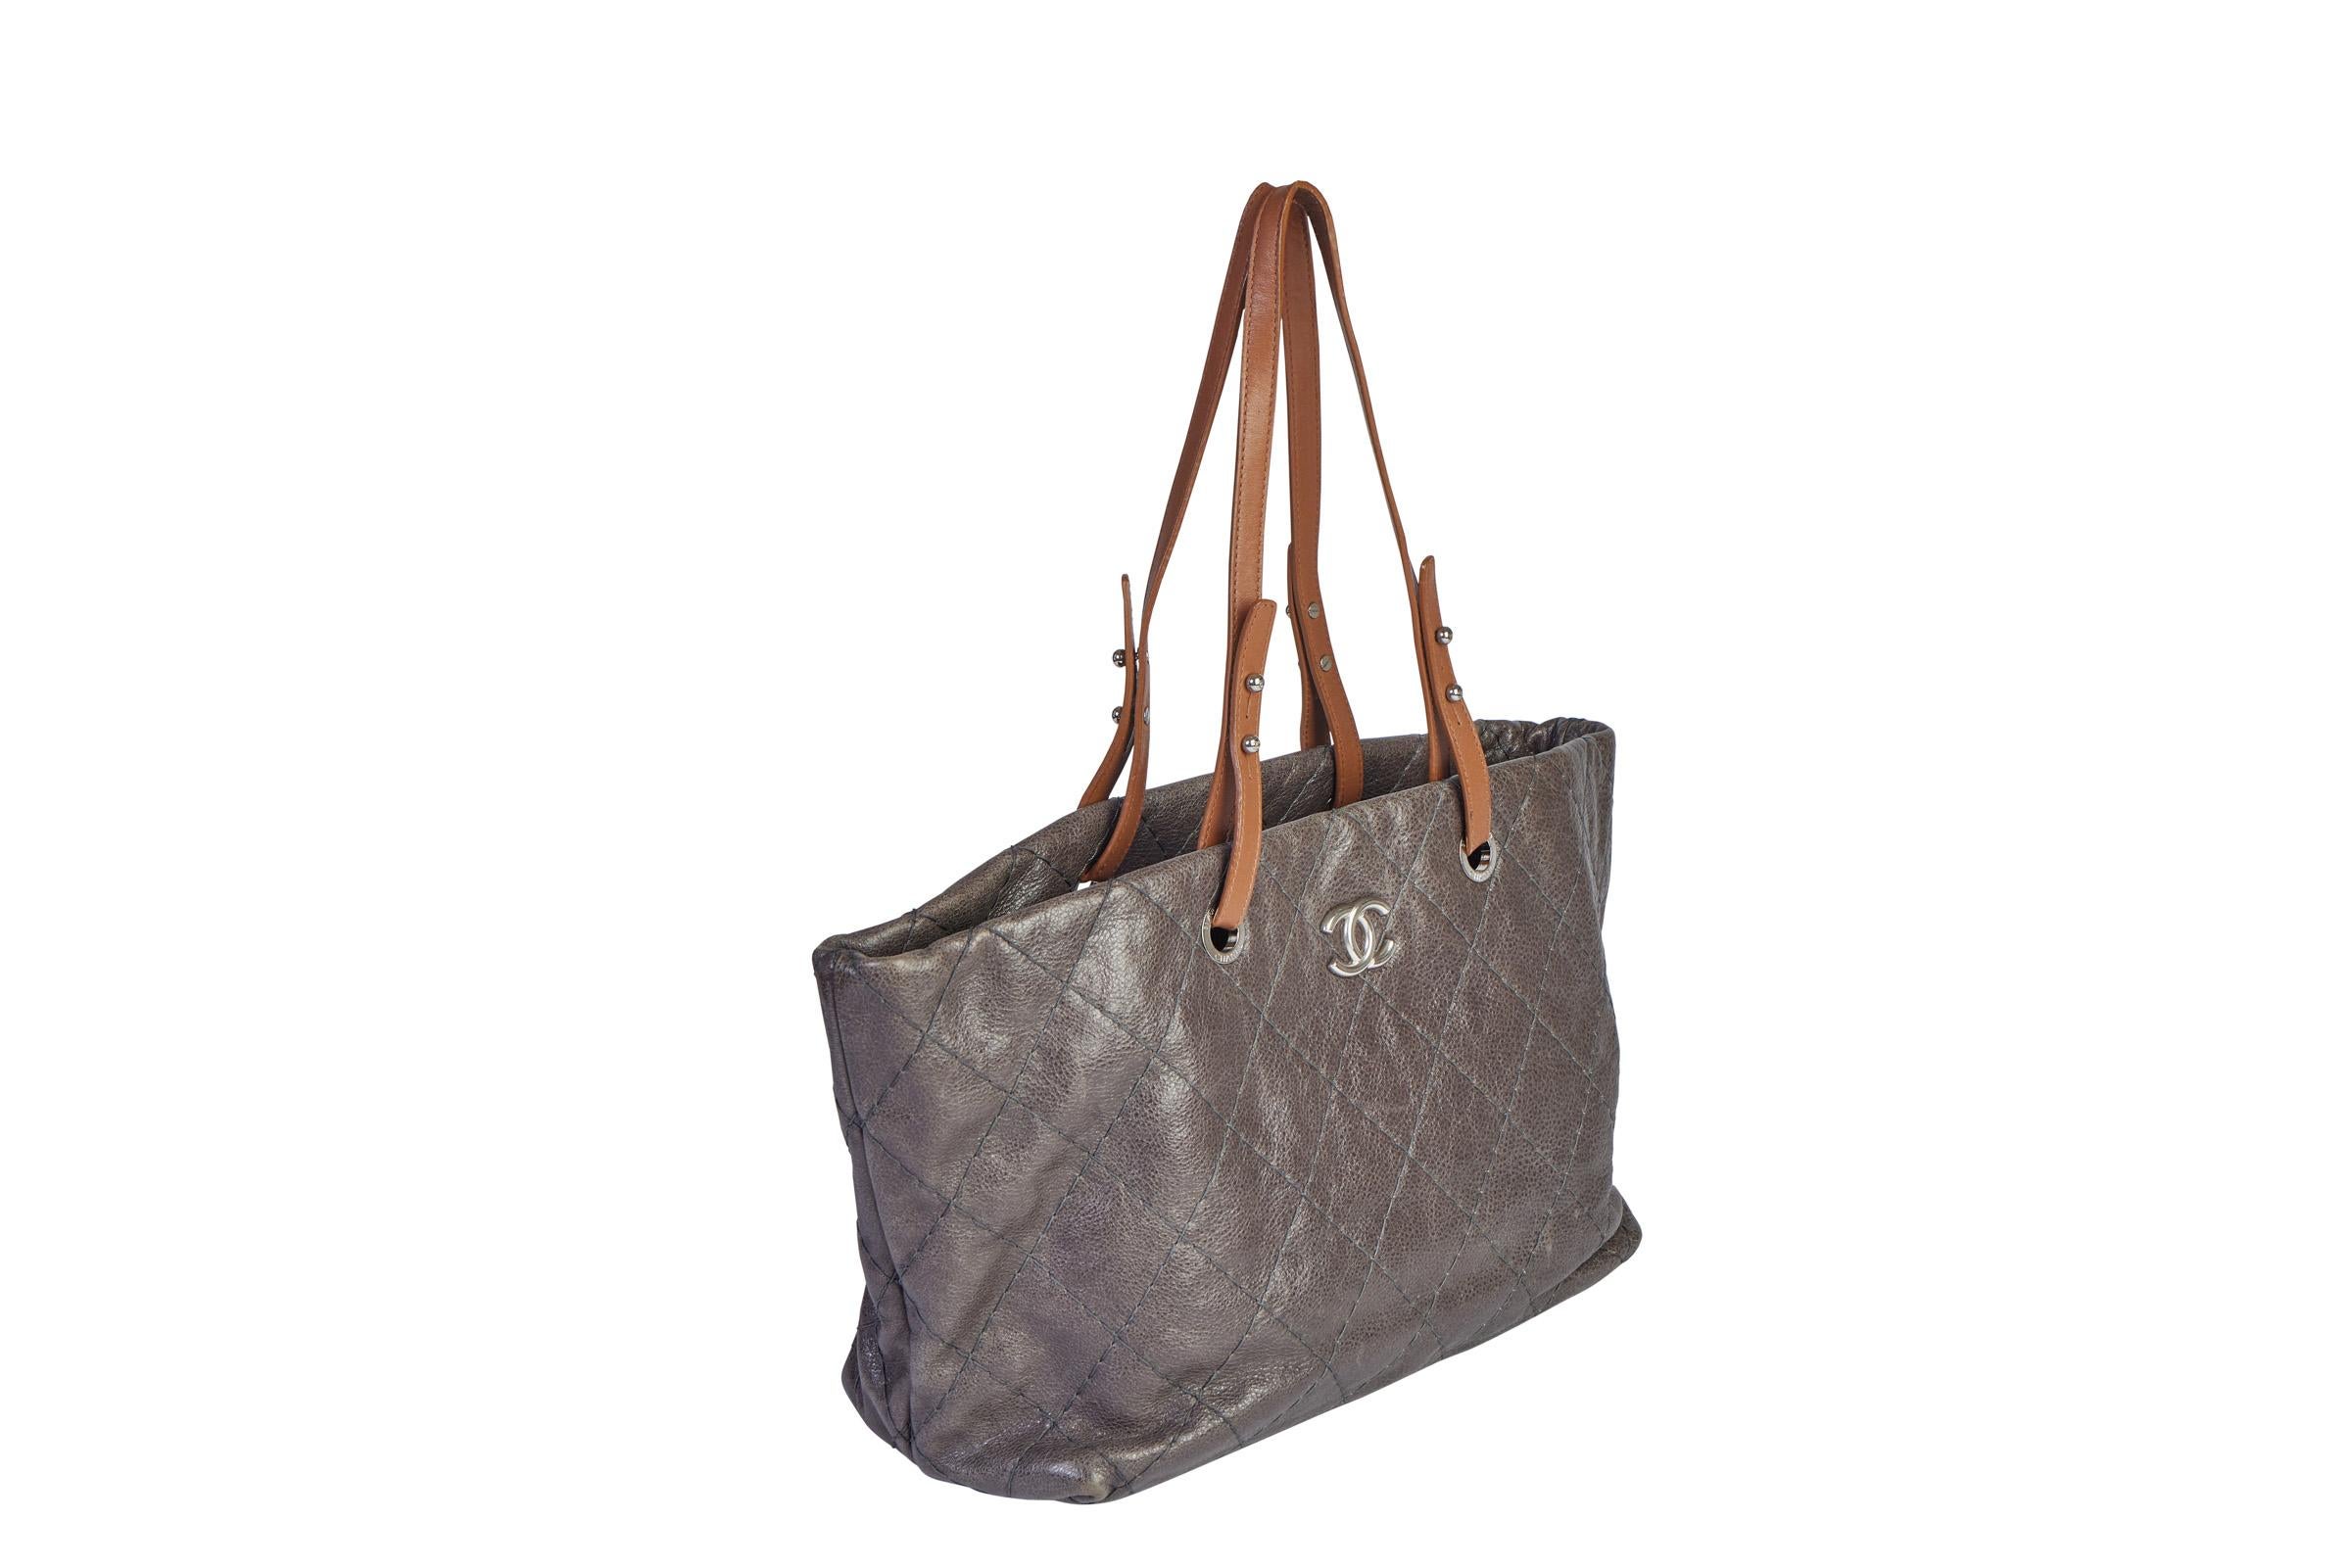 Chanel gray glazed caviar shoulder tote with front cc silver logo. Center zipped compartment, interior zipped pocket, 2 open compartments and easy find key strap. Great everyday bag. Contrasting natural brown straps. Shoulder drop 9